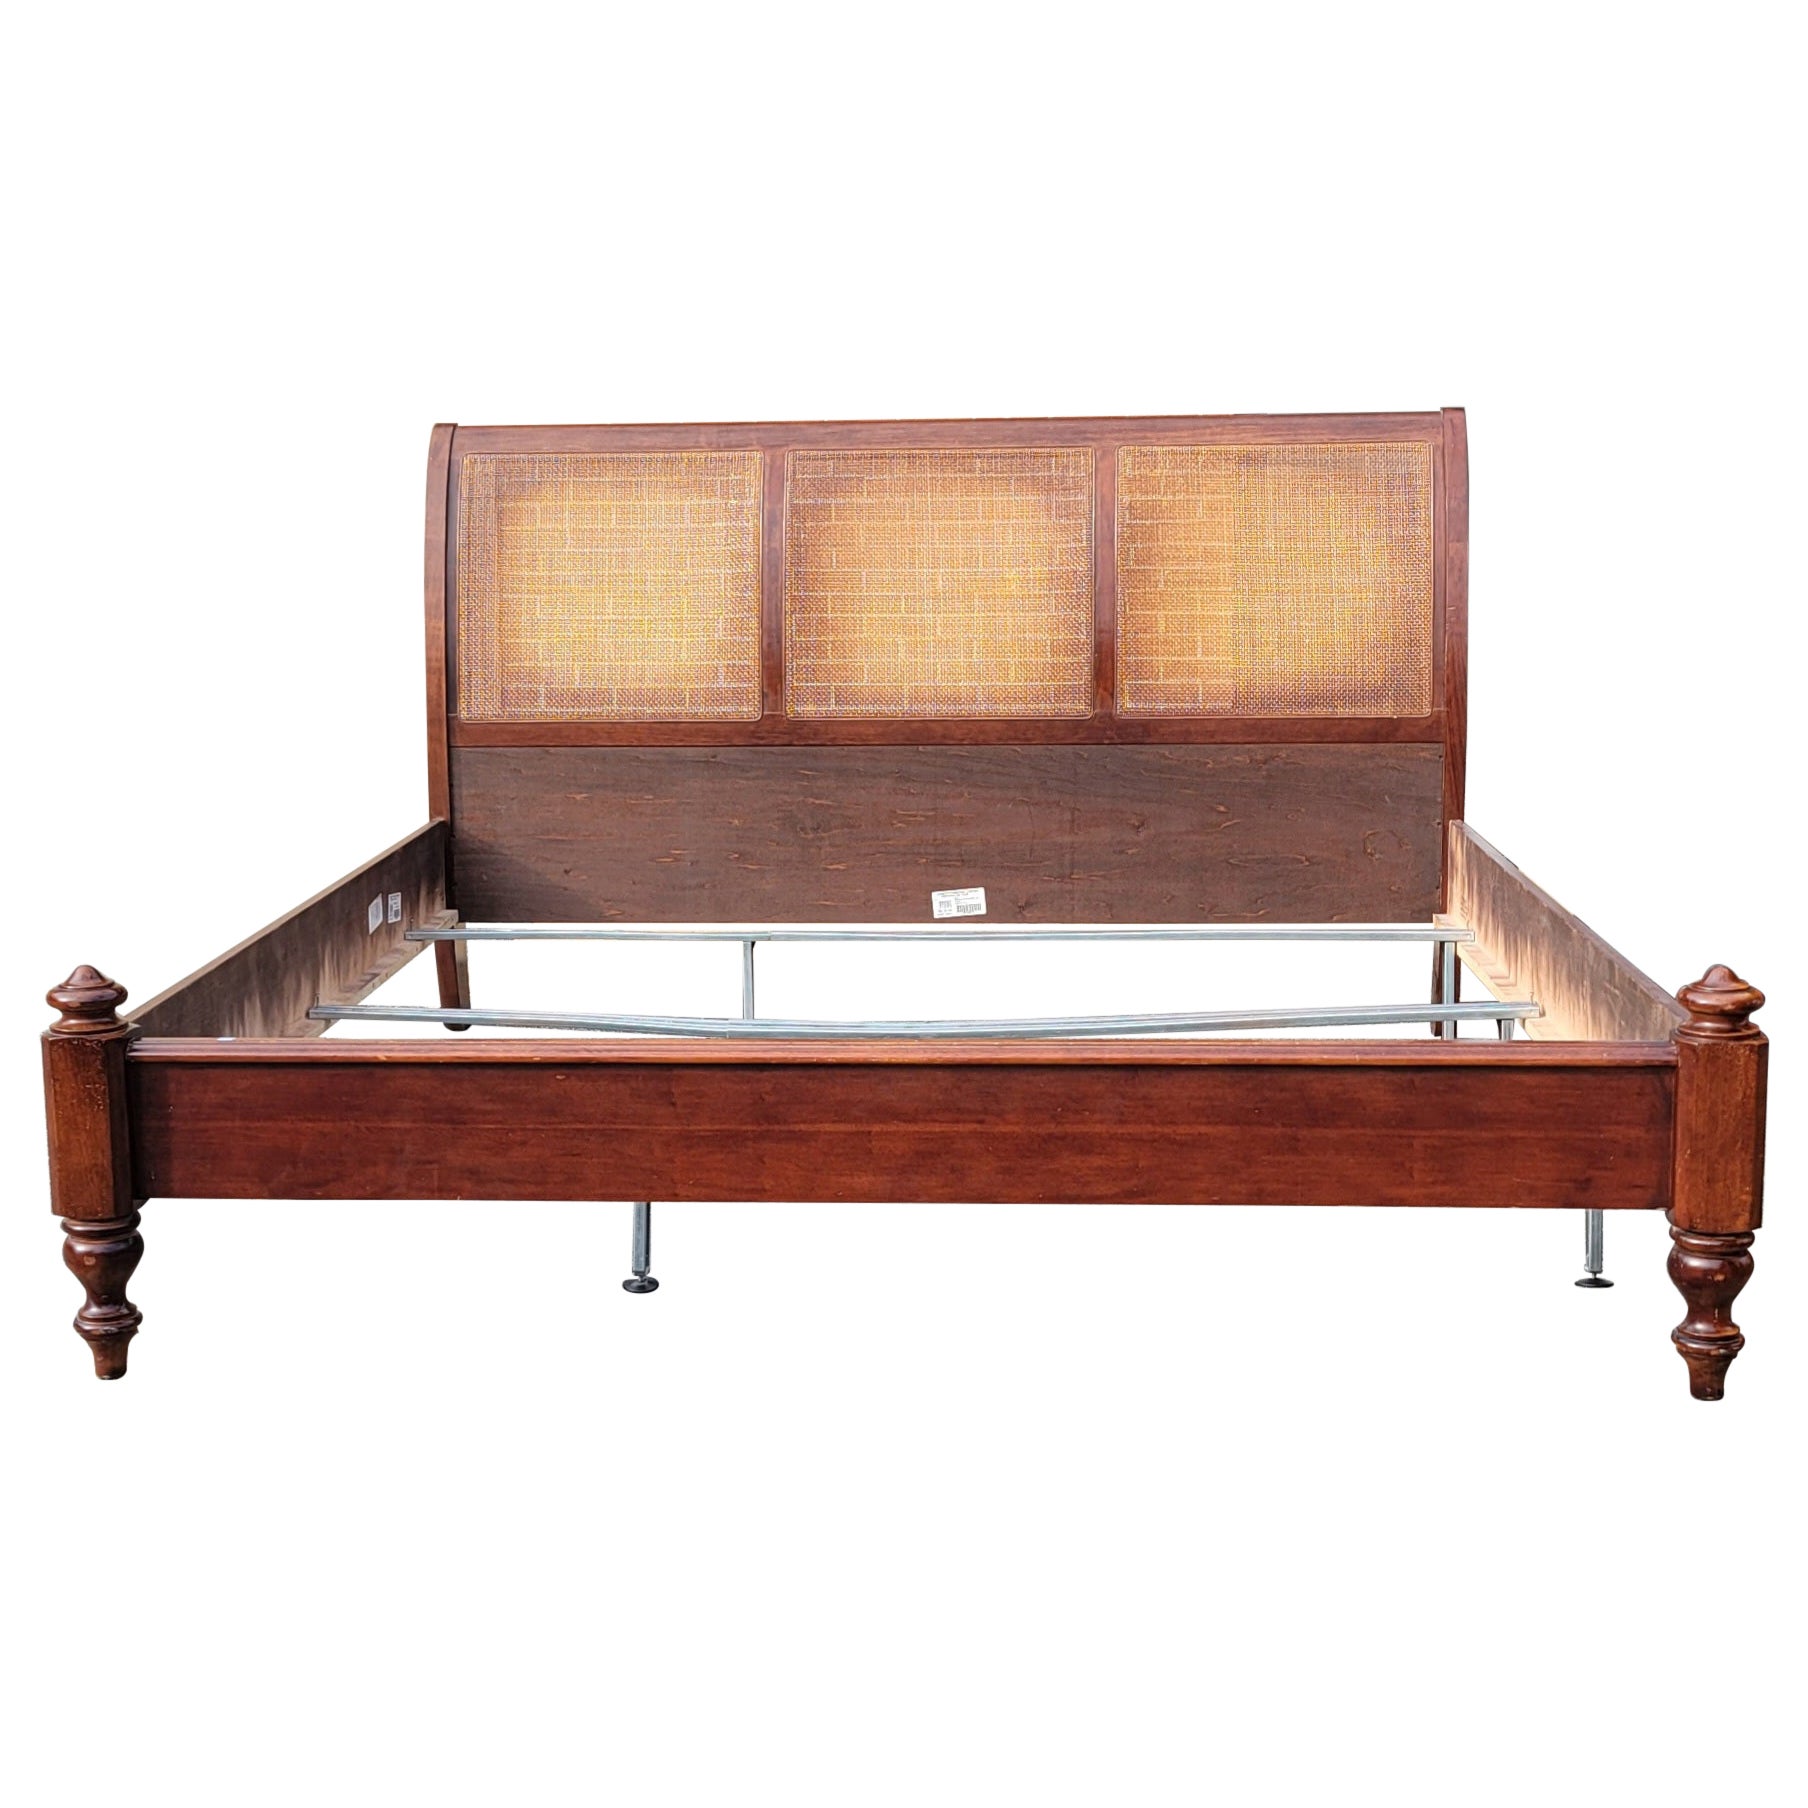 Stanley Furniture King Size Mahogany Bed Frame with Cane Panels Headboard